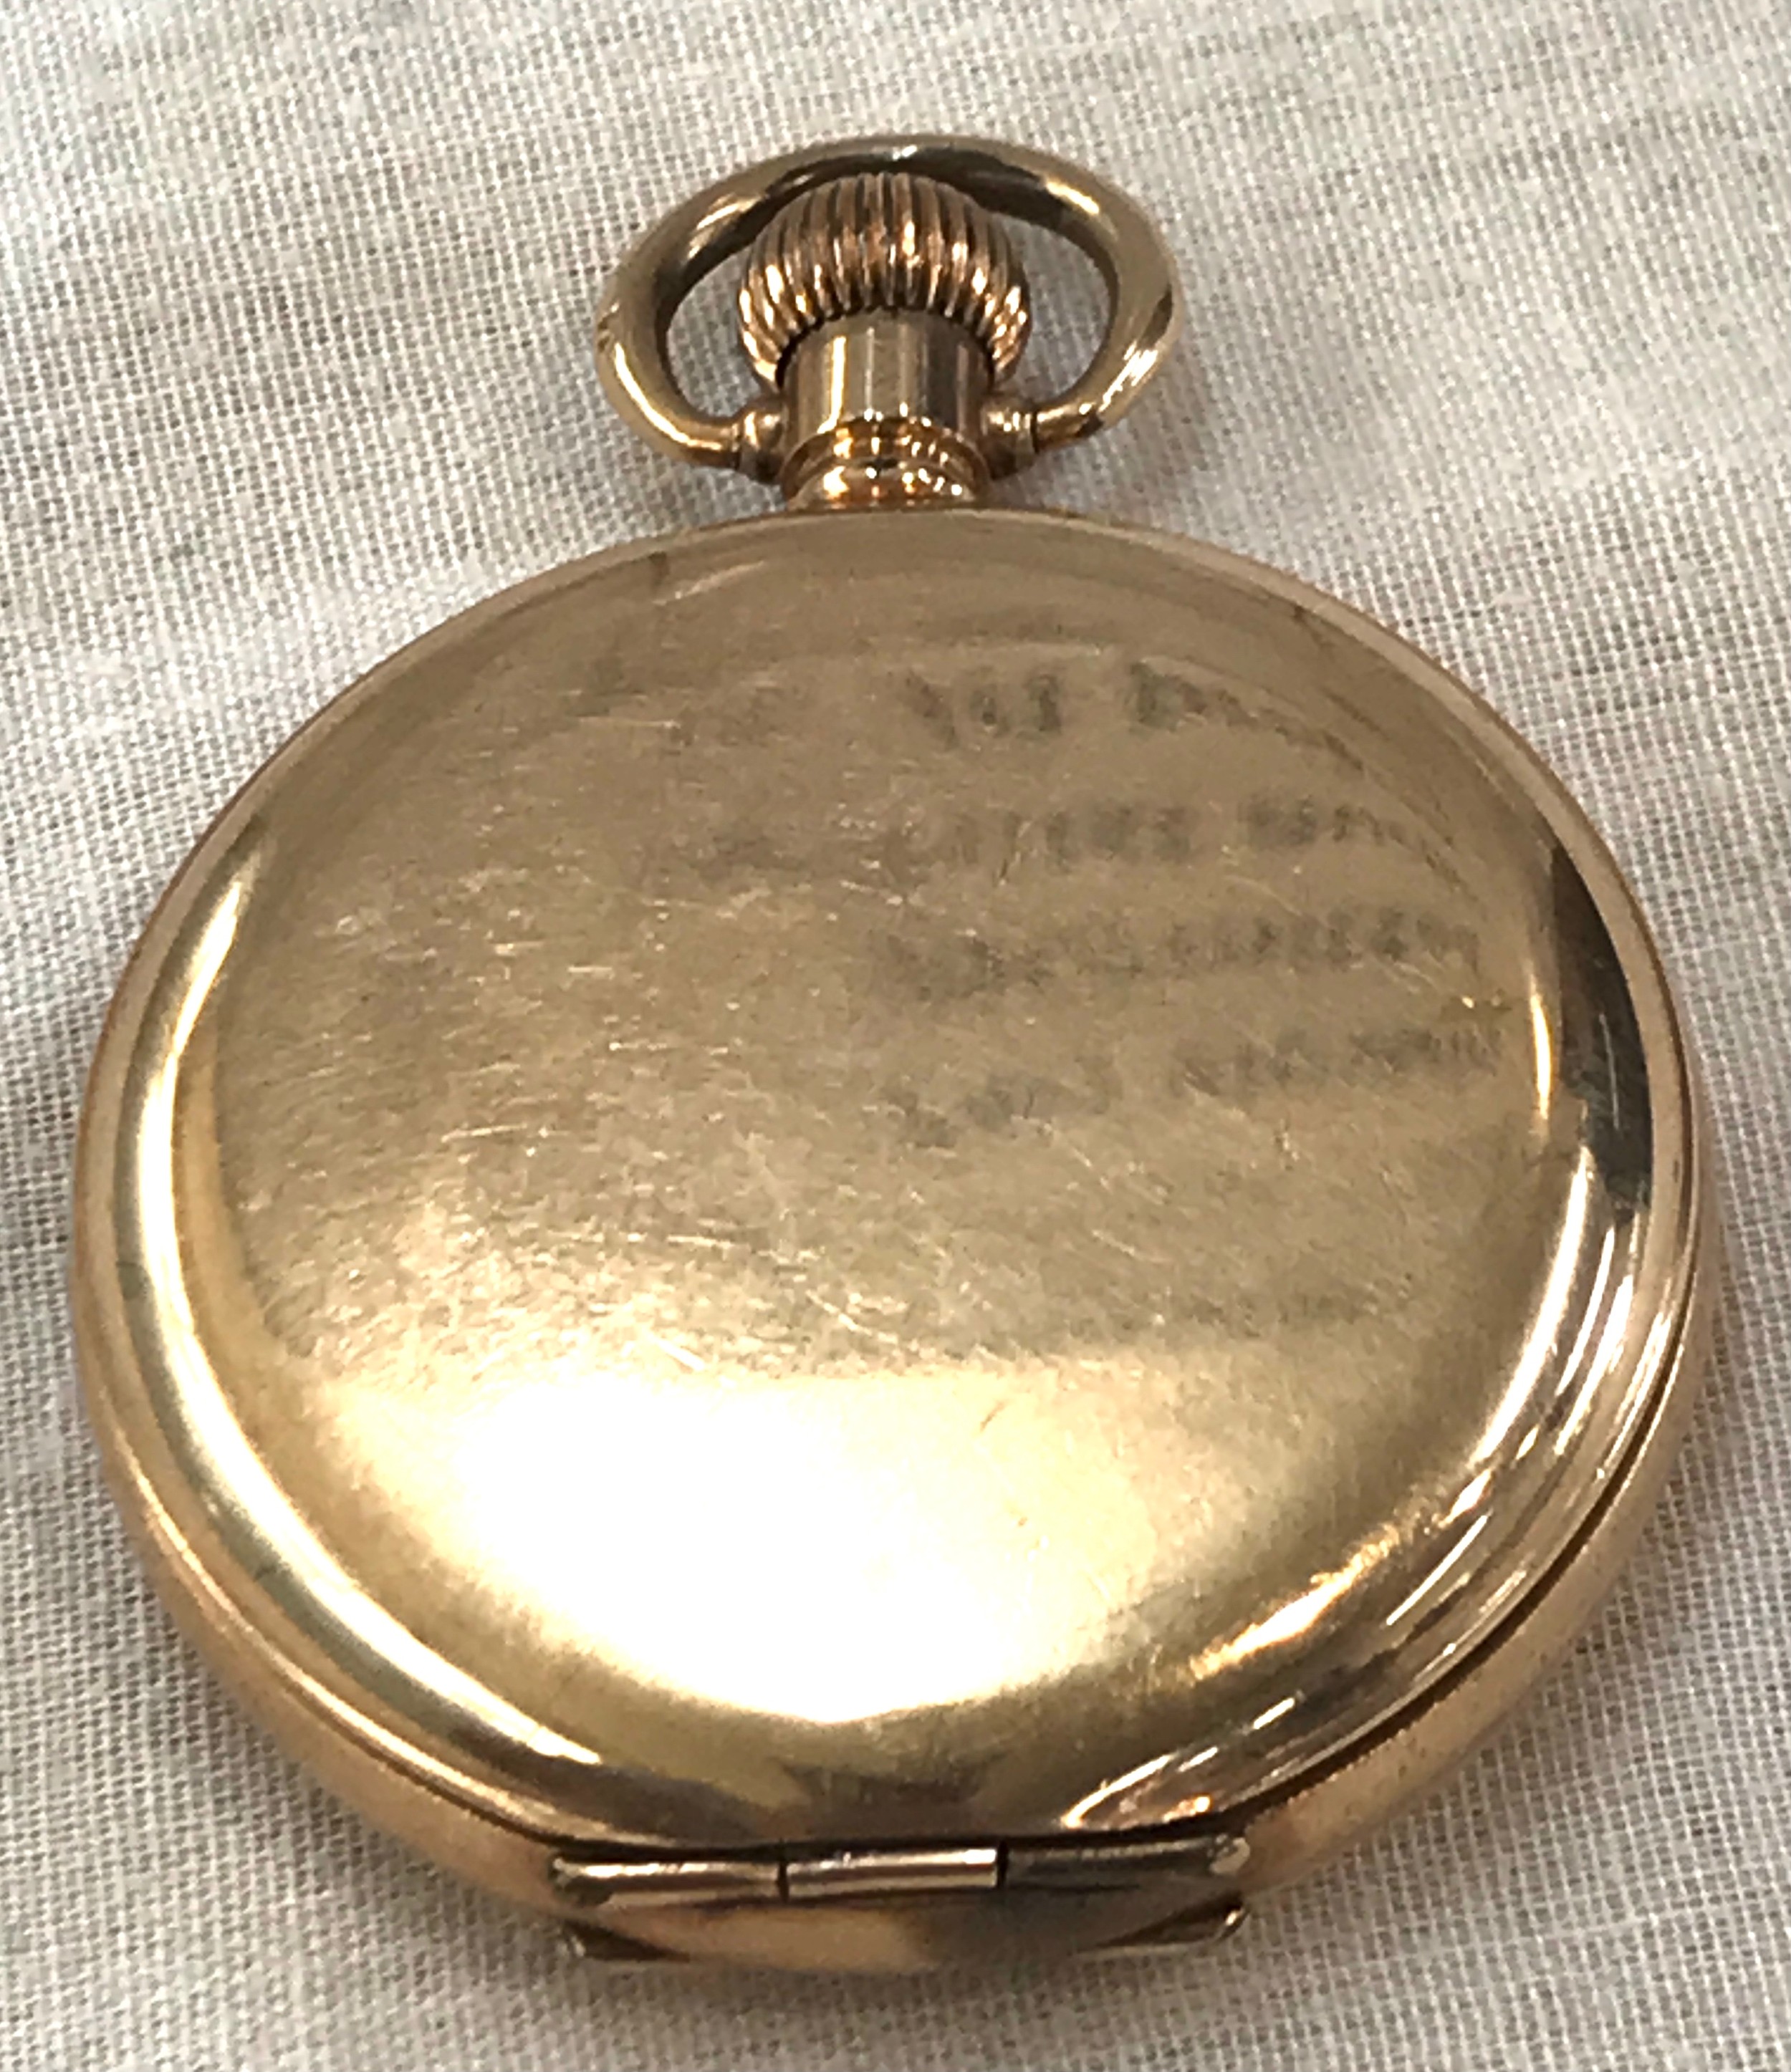 Gold plated full hunter Waltham pocket watch, untested - Image 3 of 4